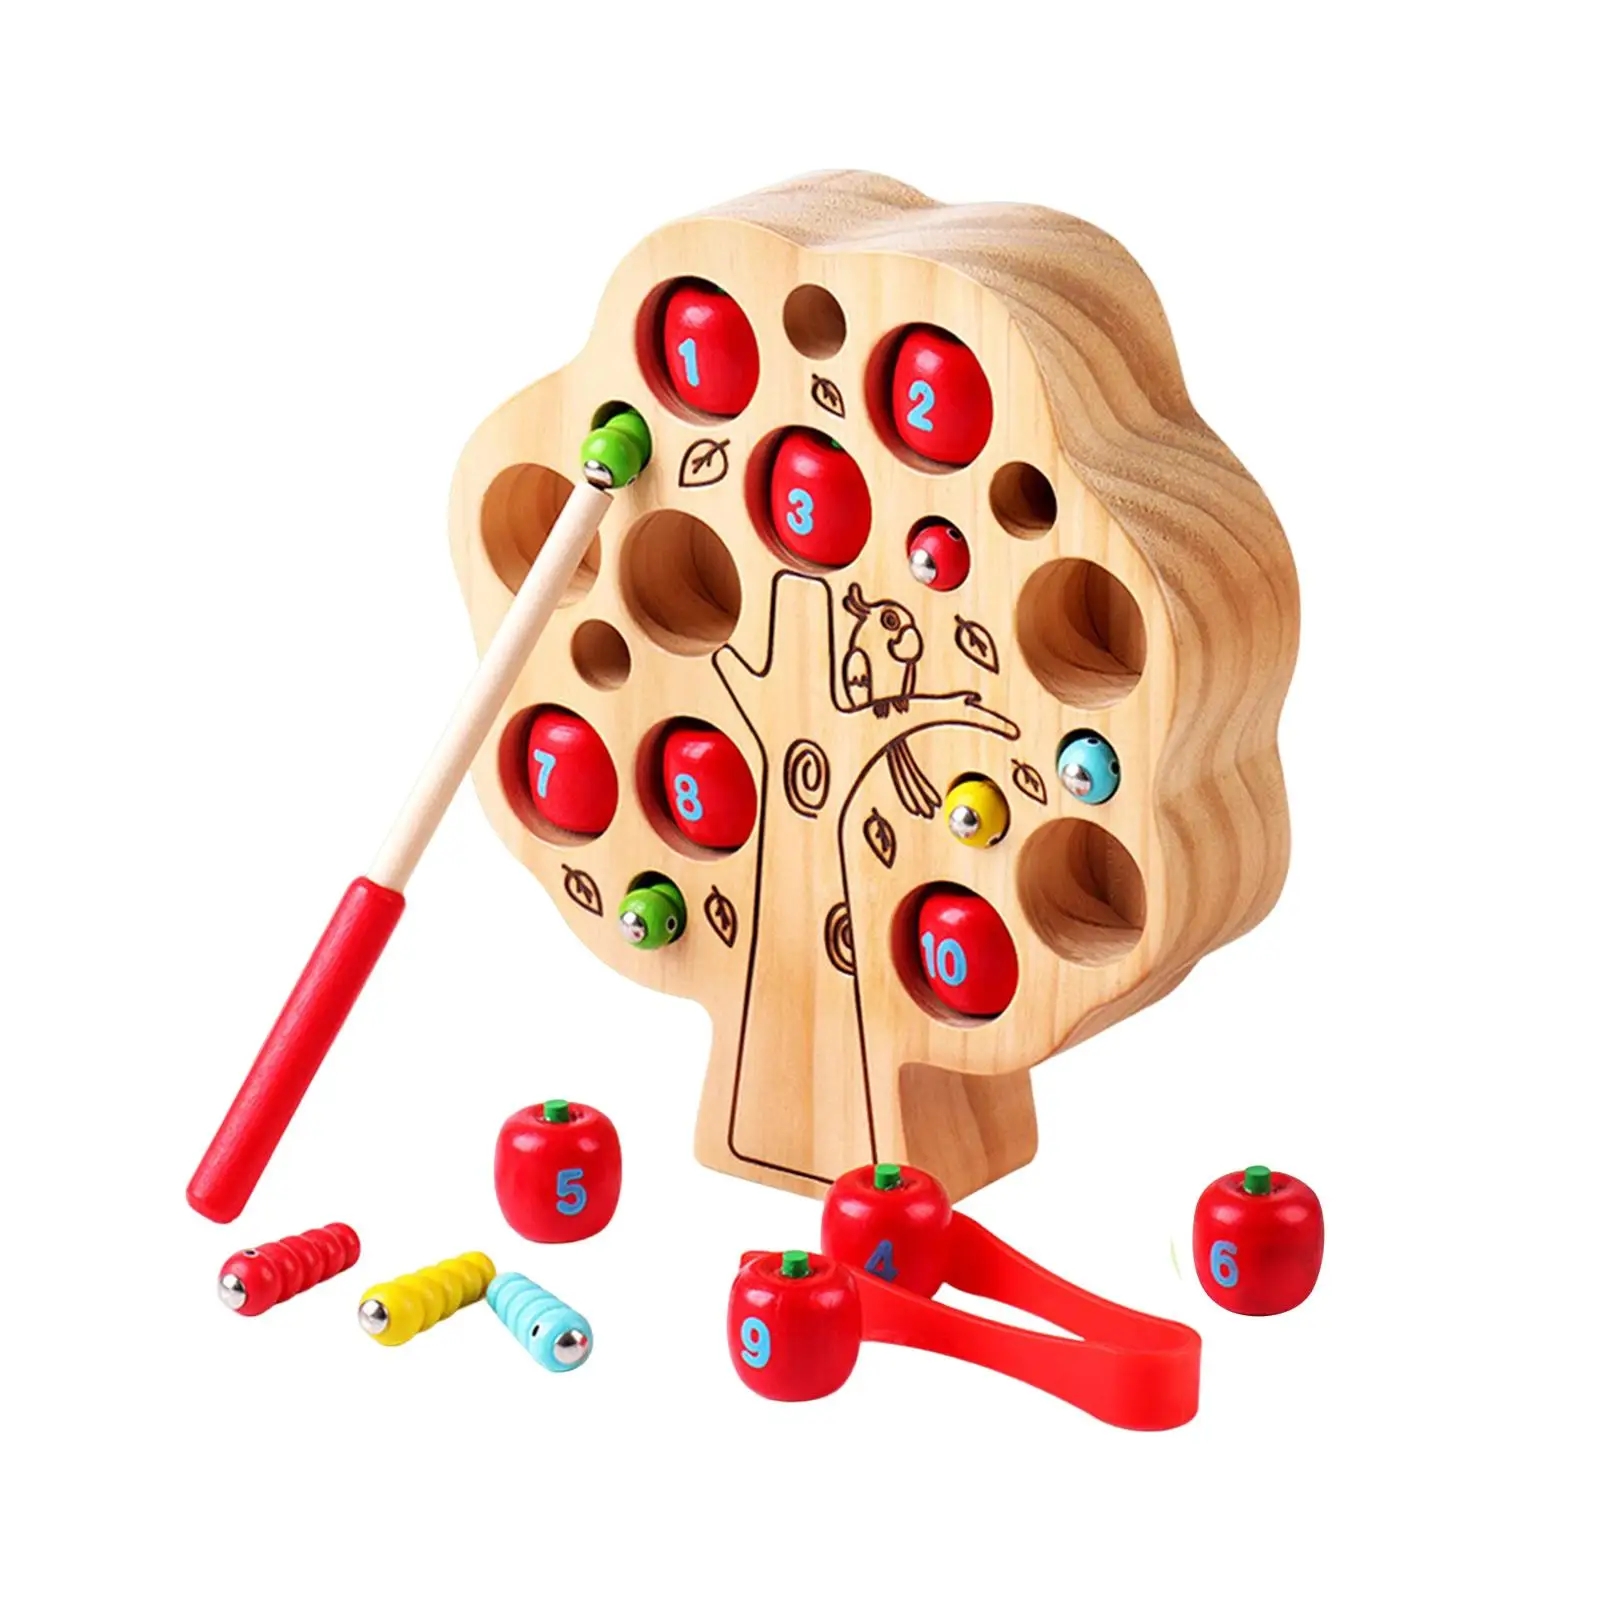 Wood Montessori Educational Toys Catching Worm Fine Motor Skill Toy Preschool Training Counting Wooden Game Toy for Boys Girls